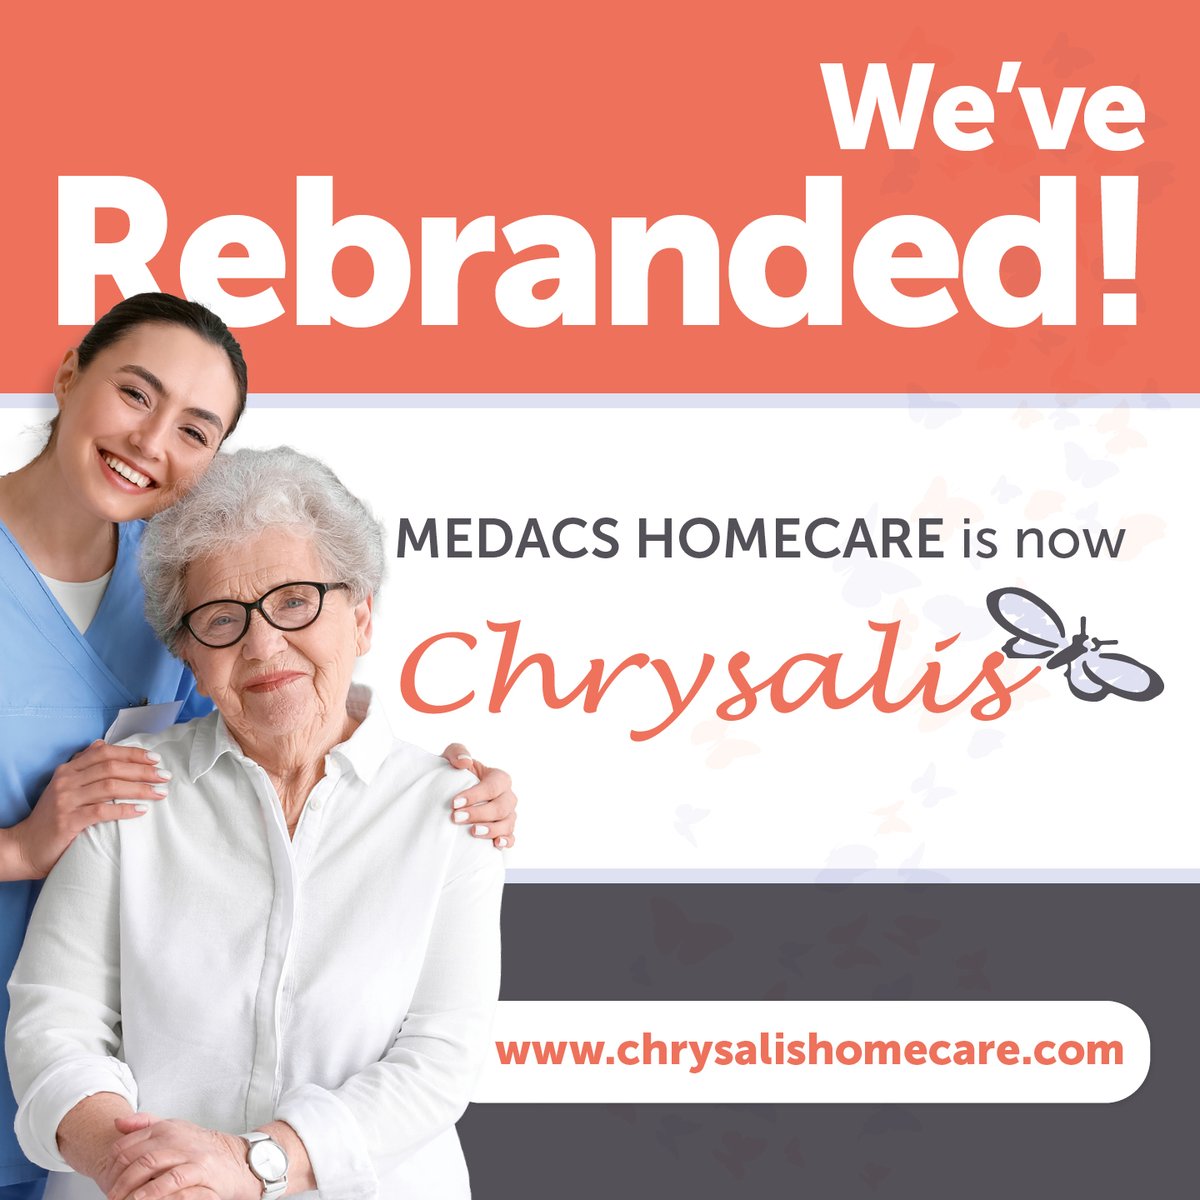 Great news! Medacs Homecare has now become Chrysalis. 

As a leading homecare provider in the UK, Chrysalis will continue to deliver the same high-quality service.

#homecare #domicilarycare #specialistcare #complexcare